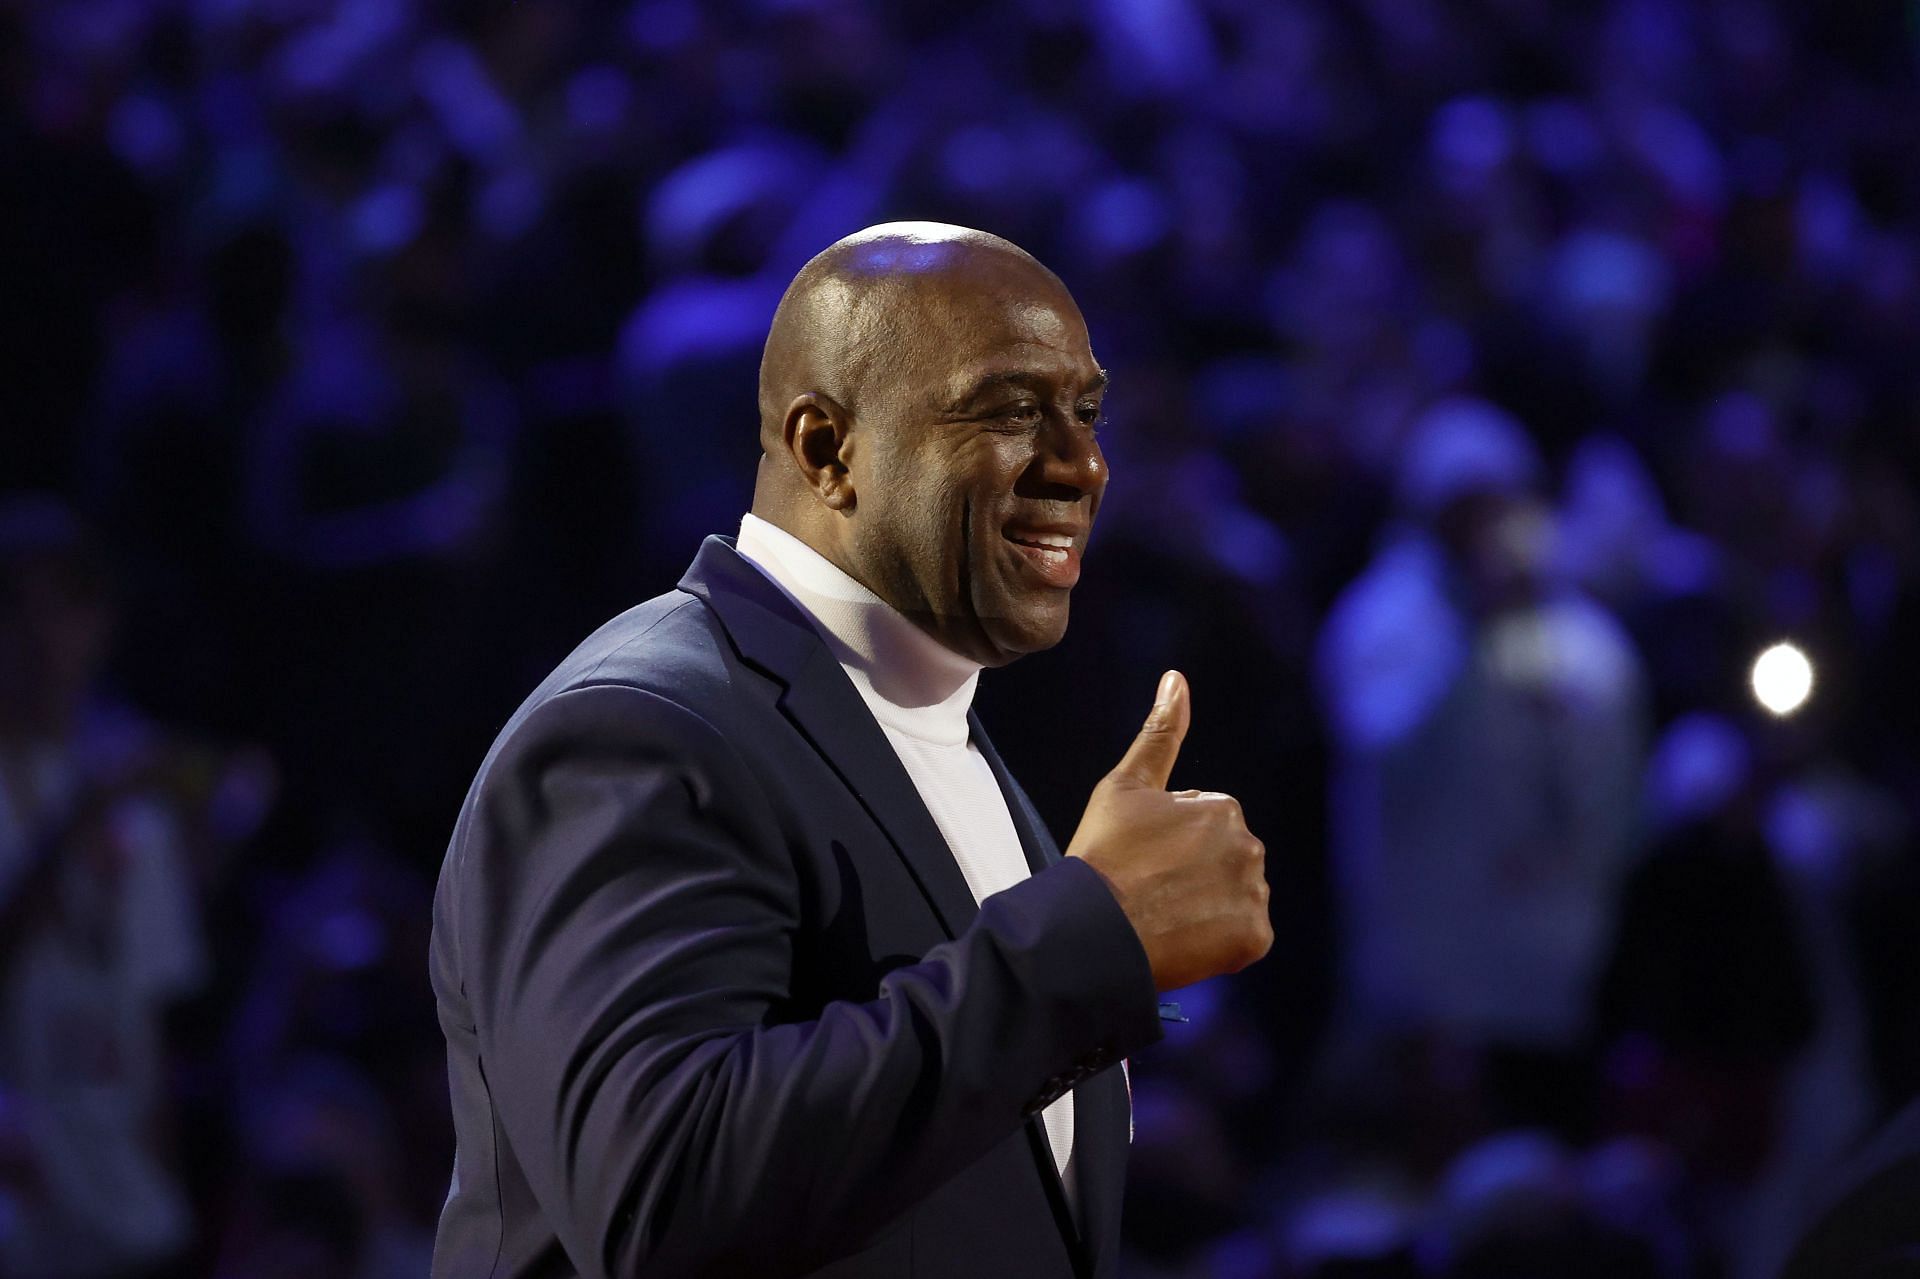 Don't say you guys... I liked being coached hard” - Magic Johnson denies  being bothered by Pat Riley's demanding coaching style unlike some teammates